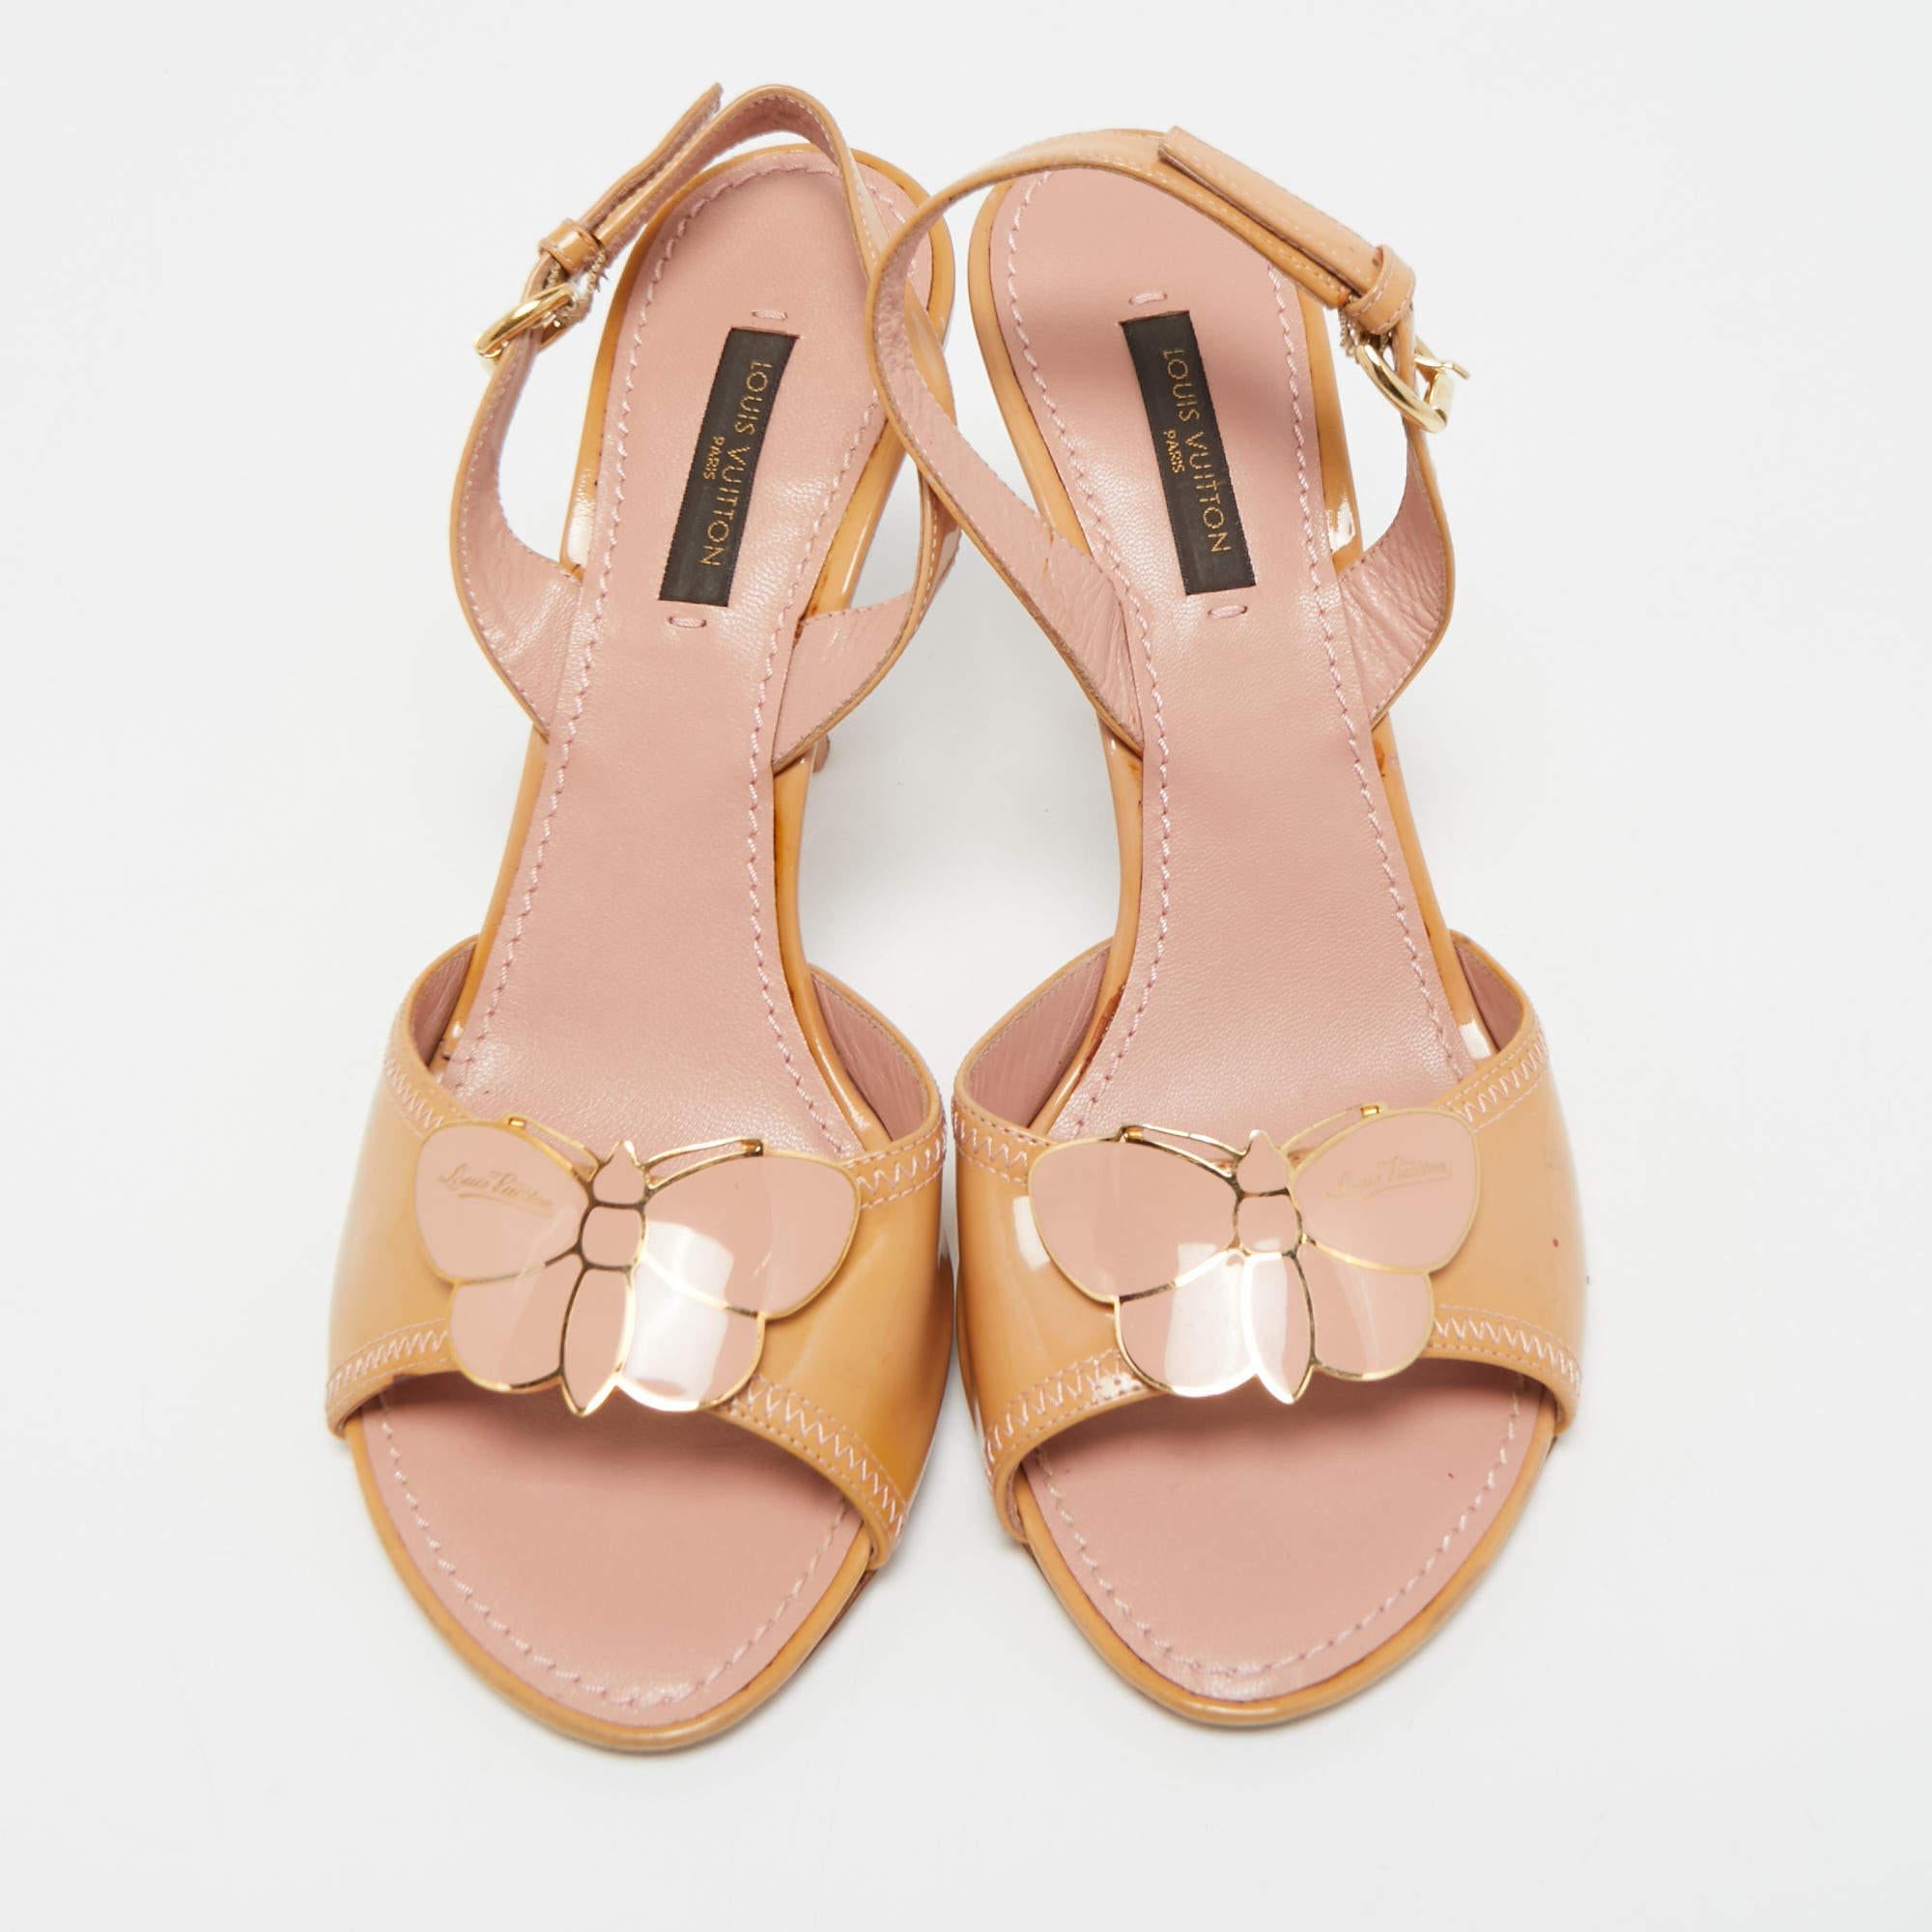 Louis Vuitton Beige Patent Leather Butterfly Slingback Sandals Size 36.5 For Sale 1